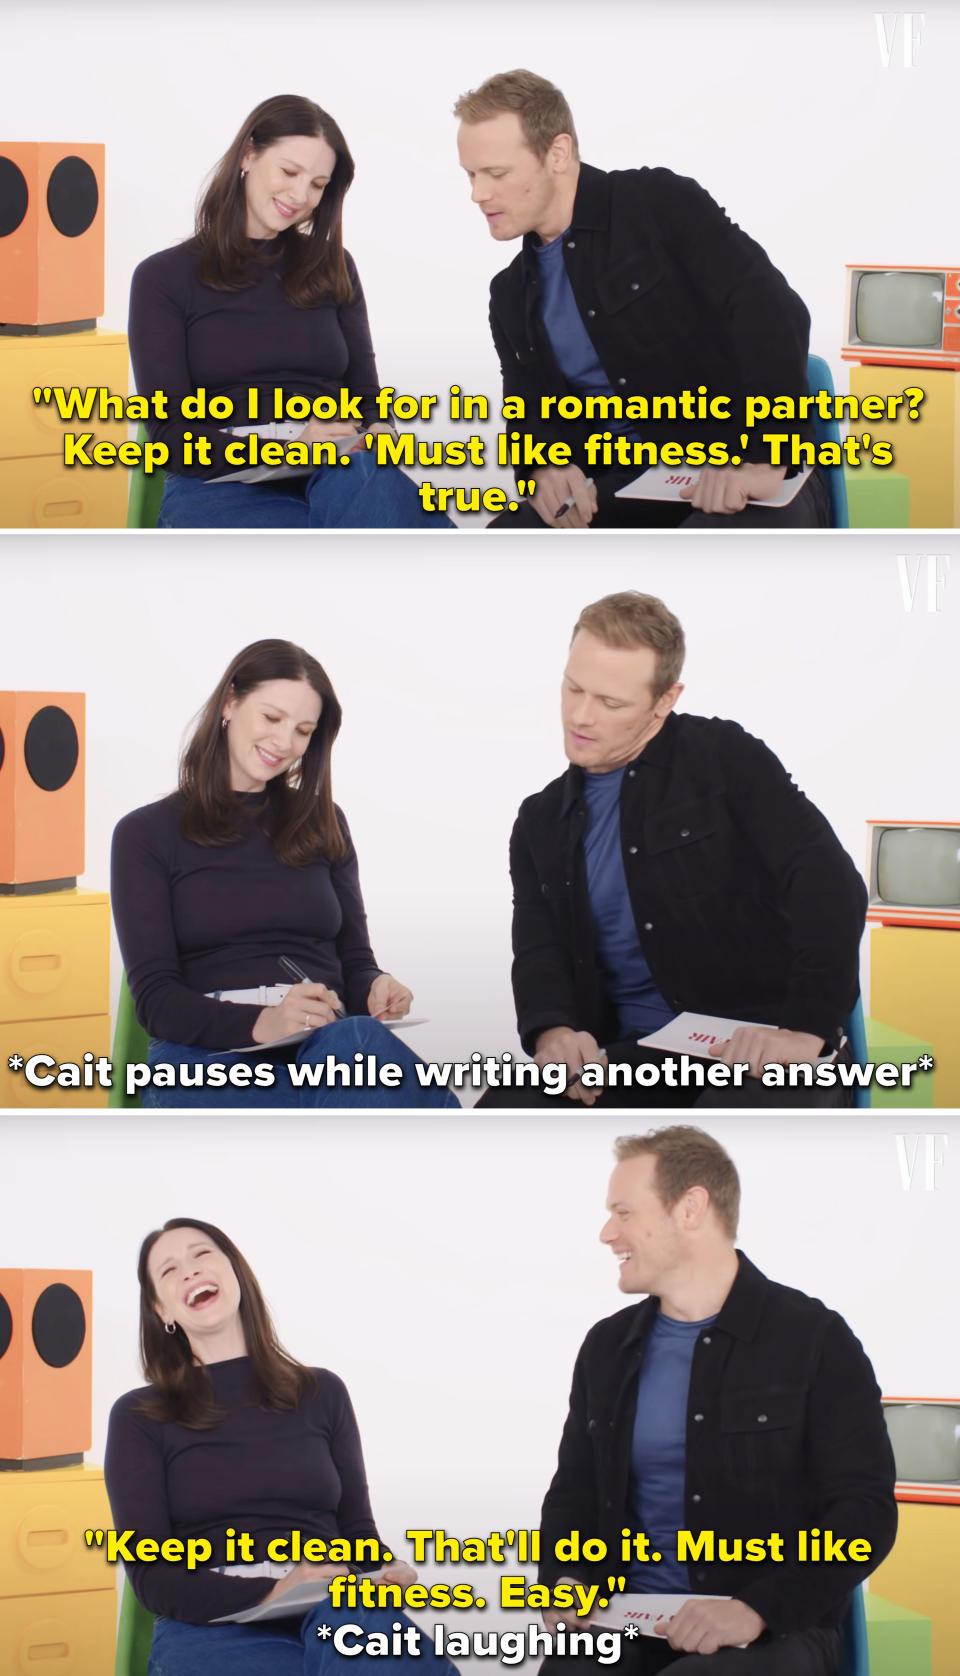 Caitriona and Sam talking and laughing